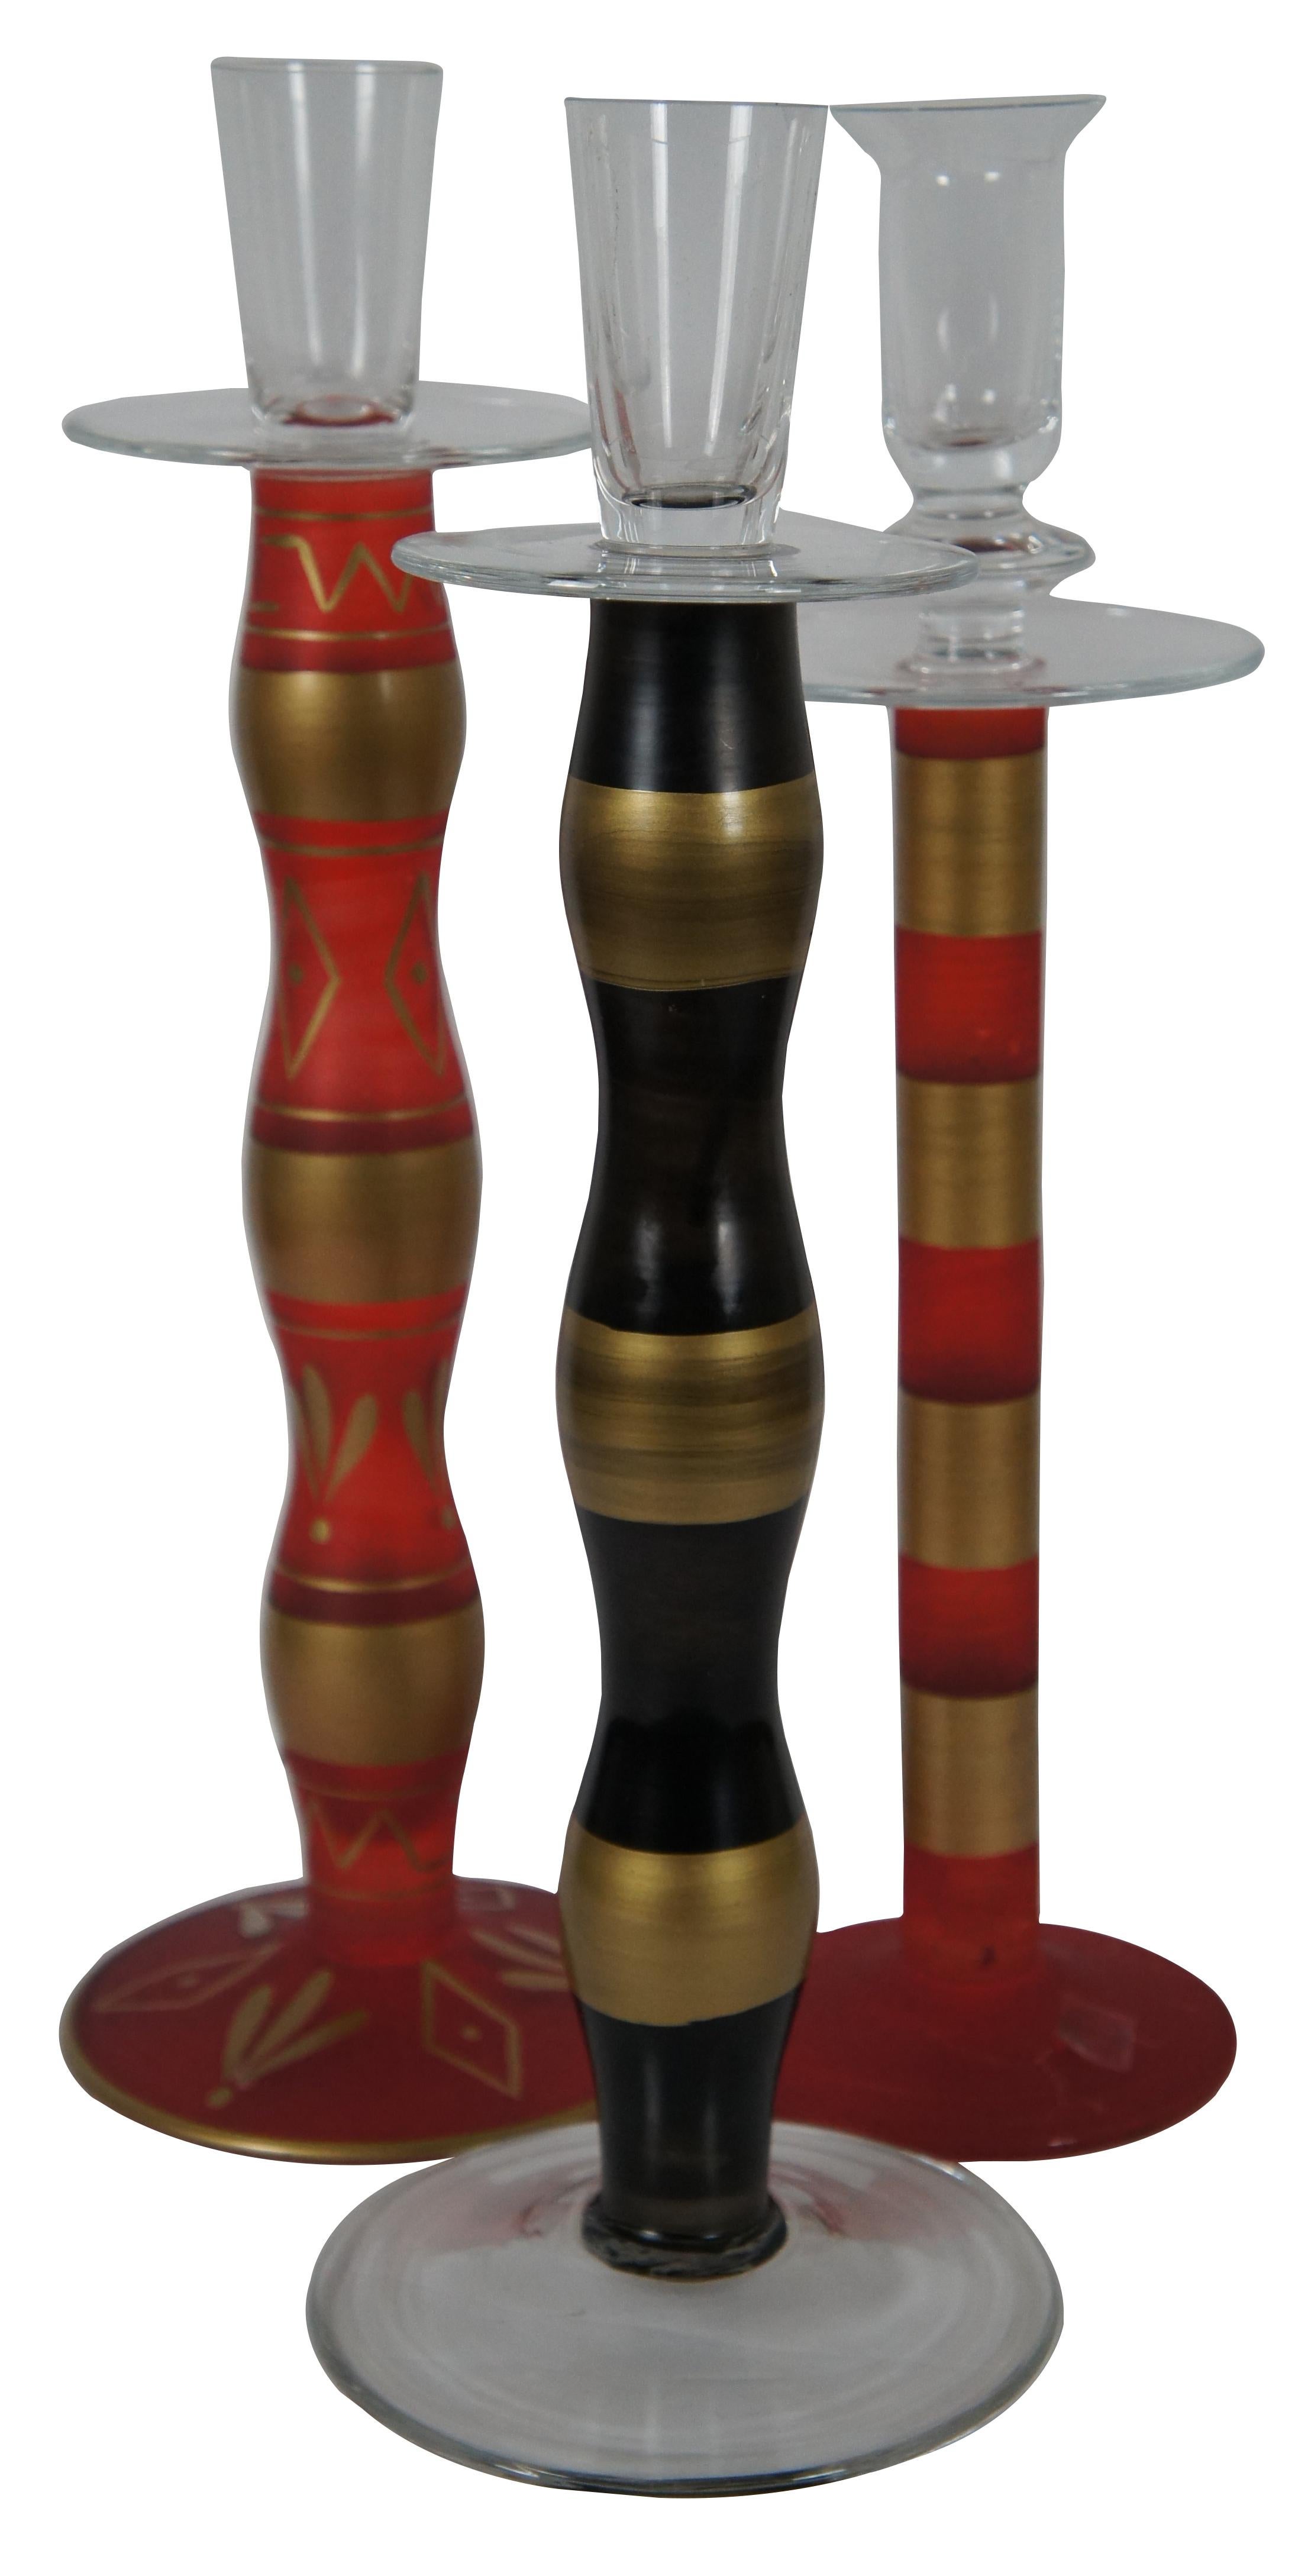 Set of three vintage hand blown and painted glass candlesticks in red and gold, and gold and black, made in Romania. Measure: 14